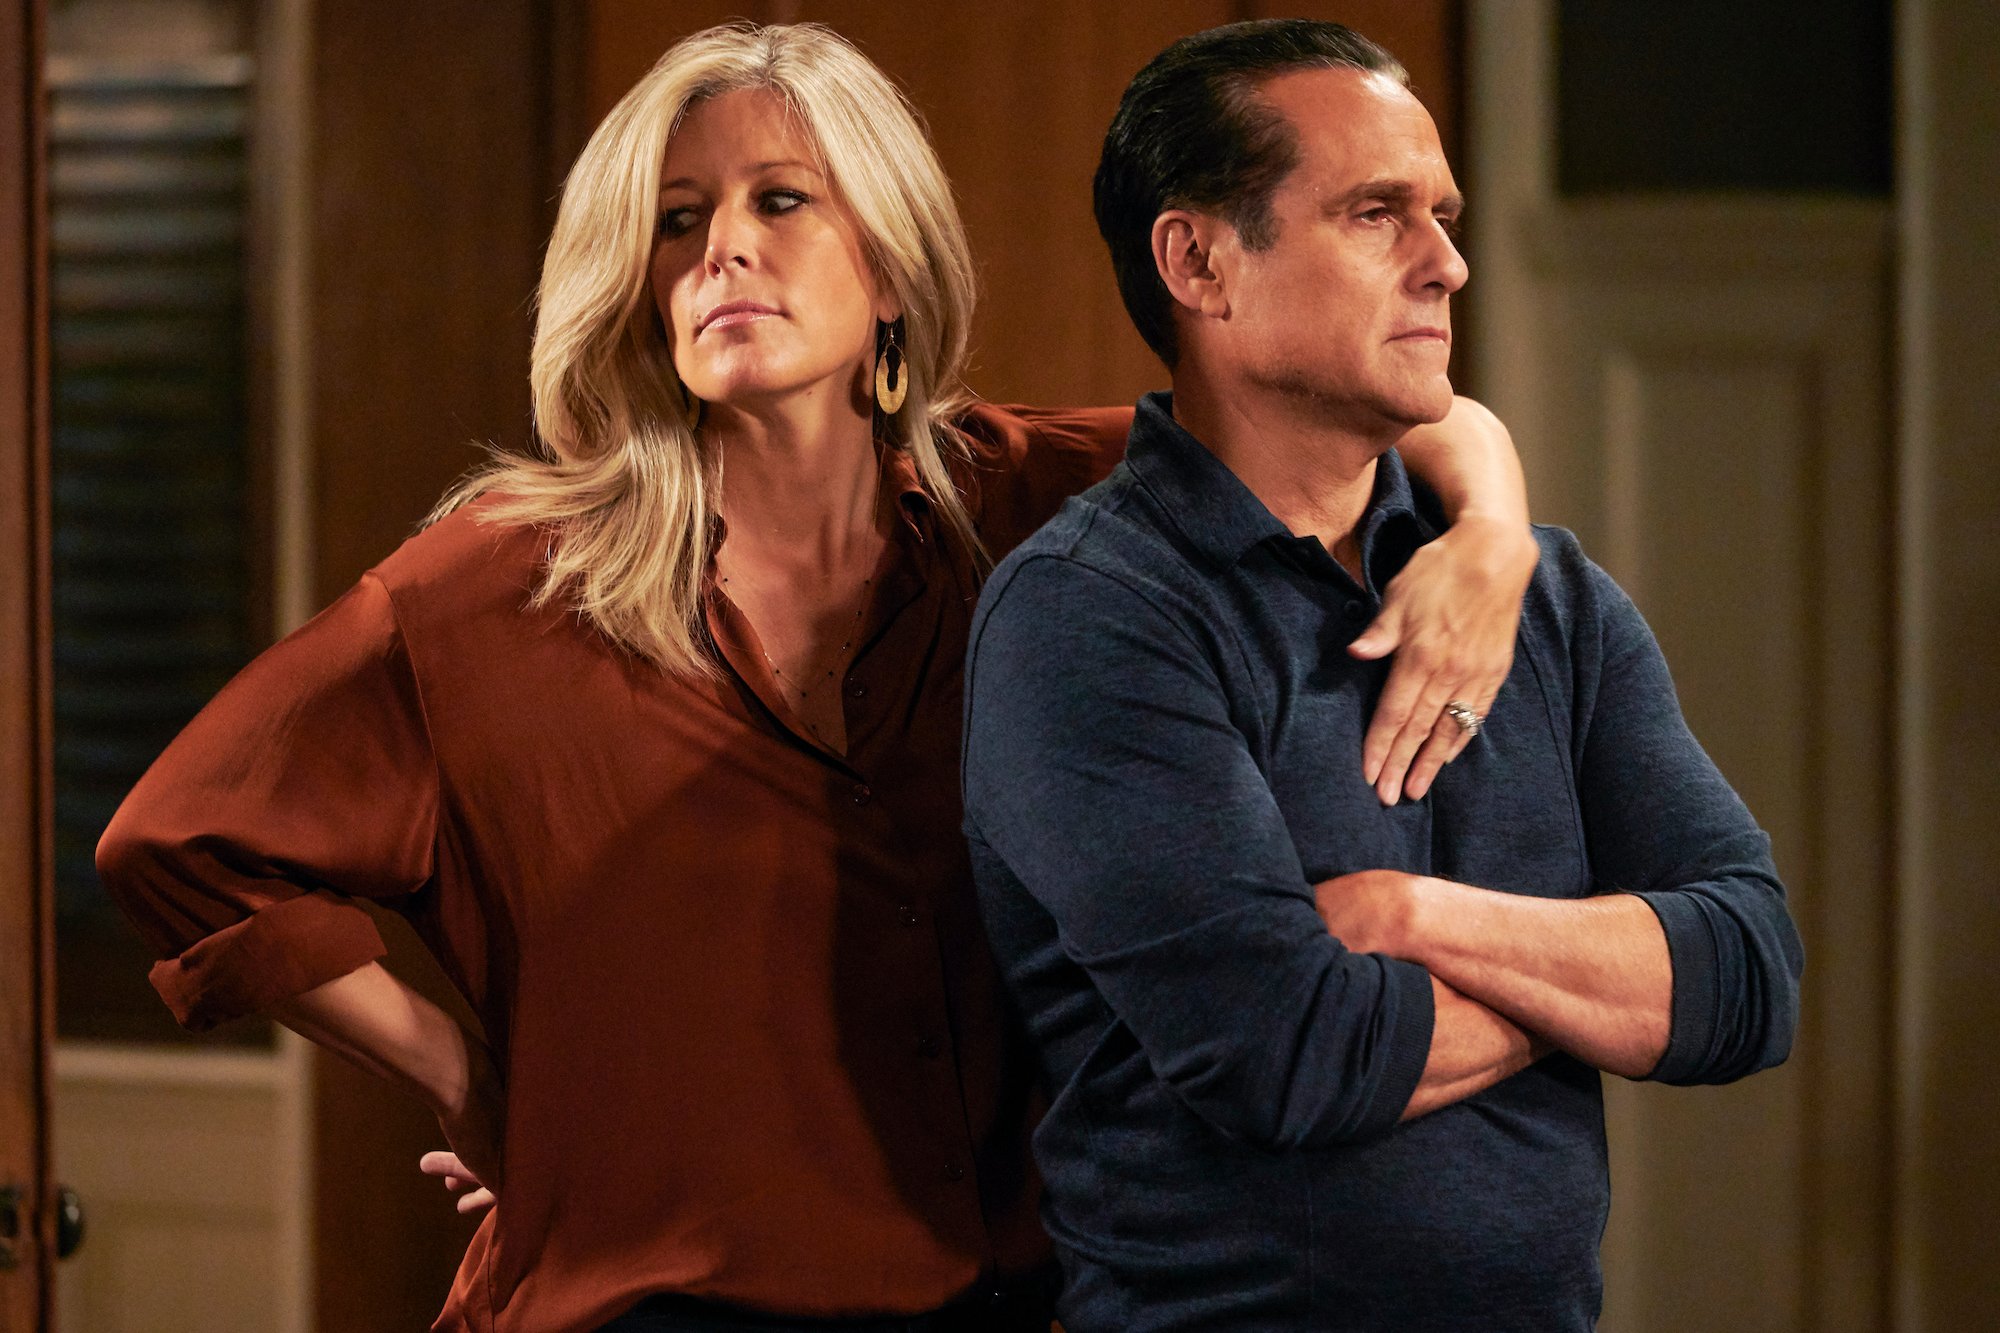 (L-R) Laura Wright as Carly Corinthos and Maurice Benard as Sonny Corinthos, slightly embracing